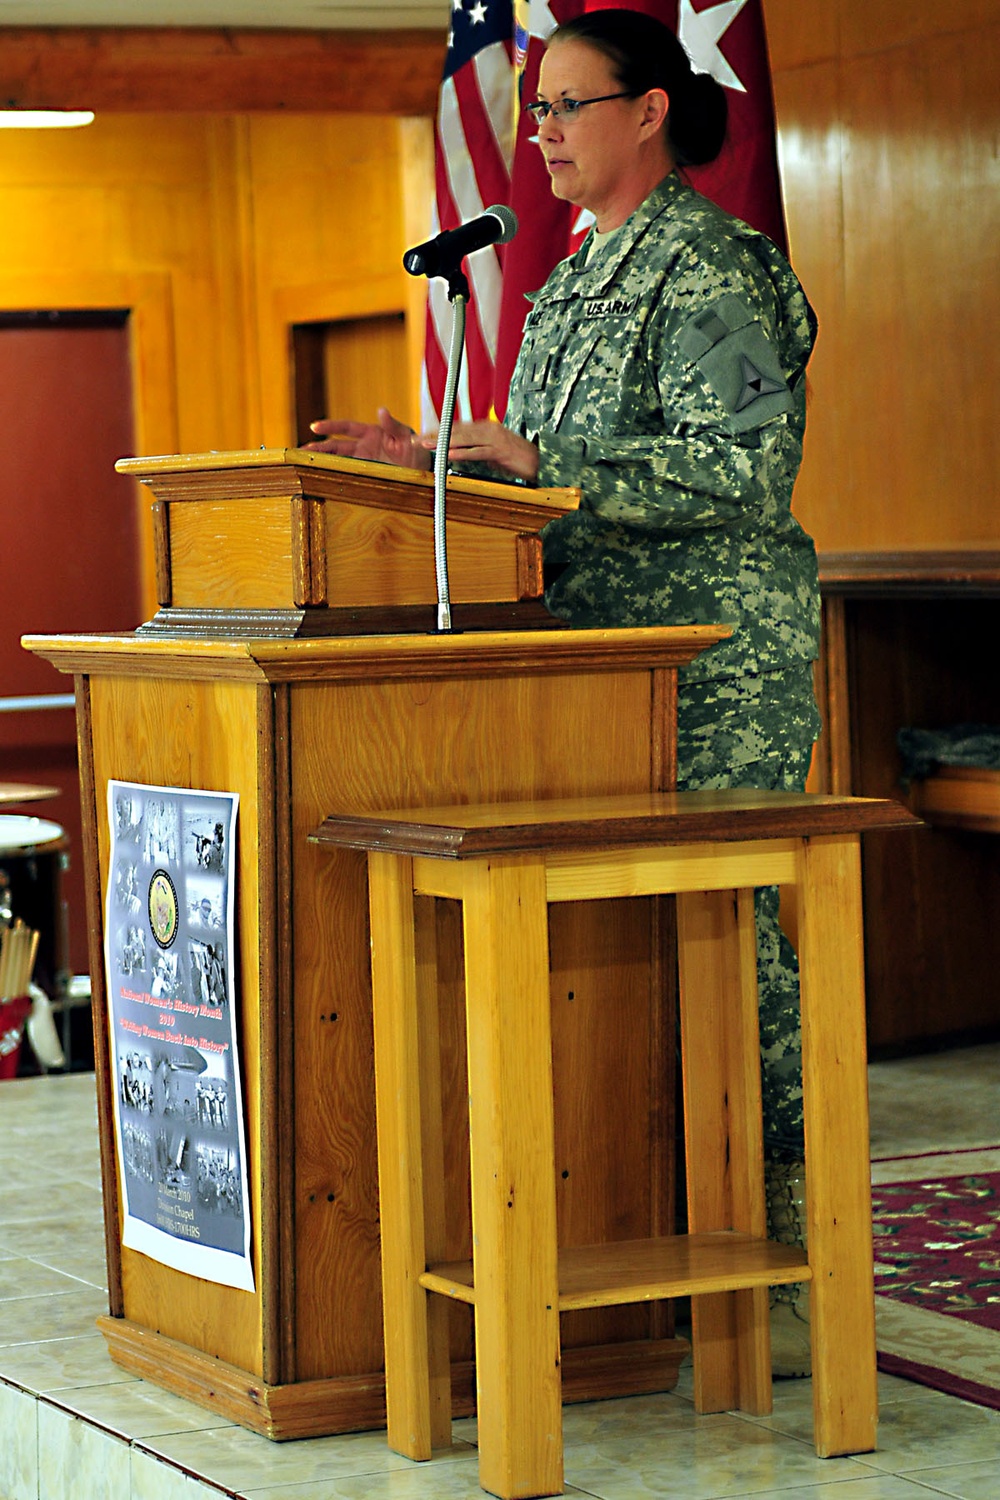 USD-C honors women in military history